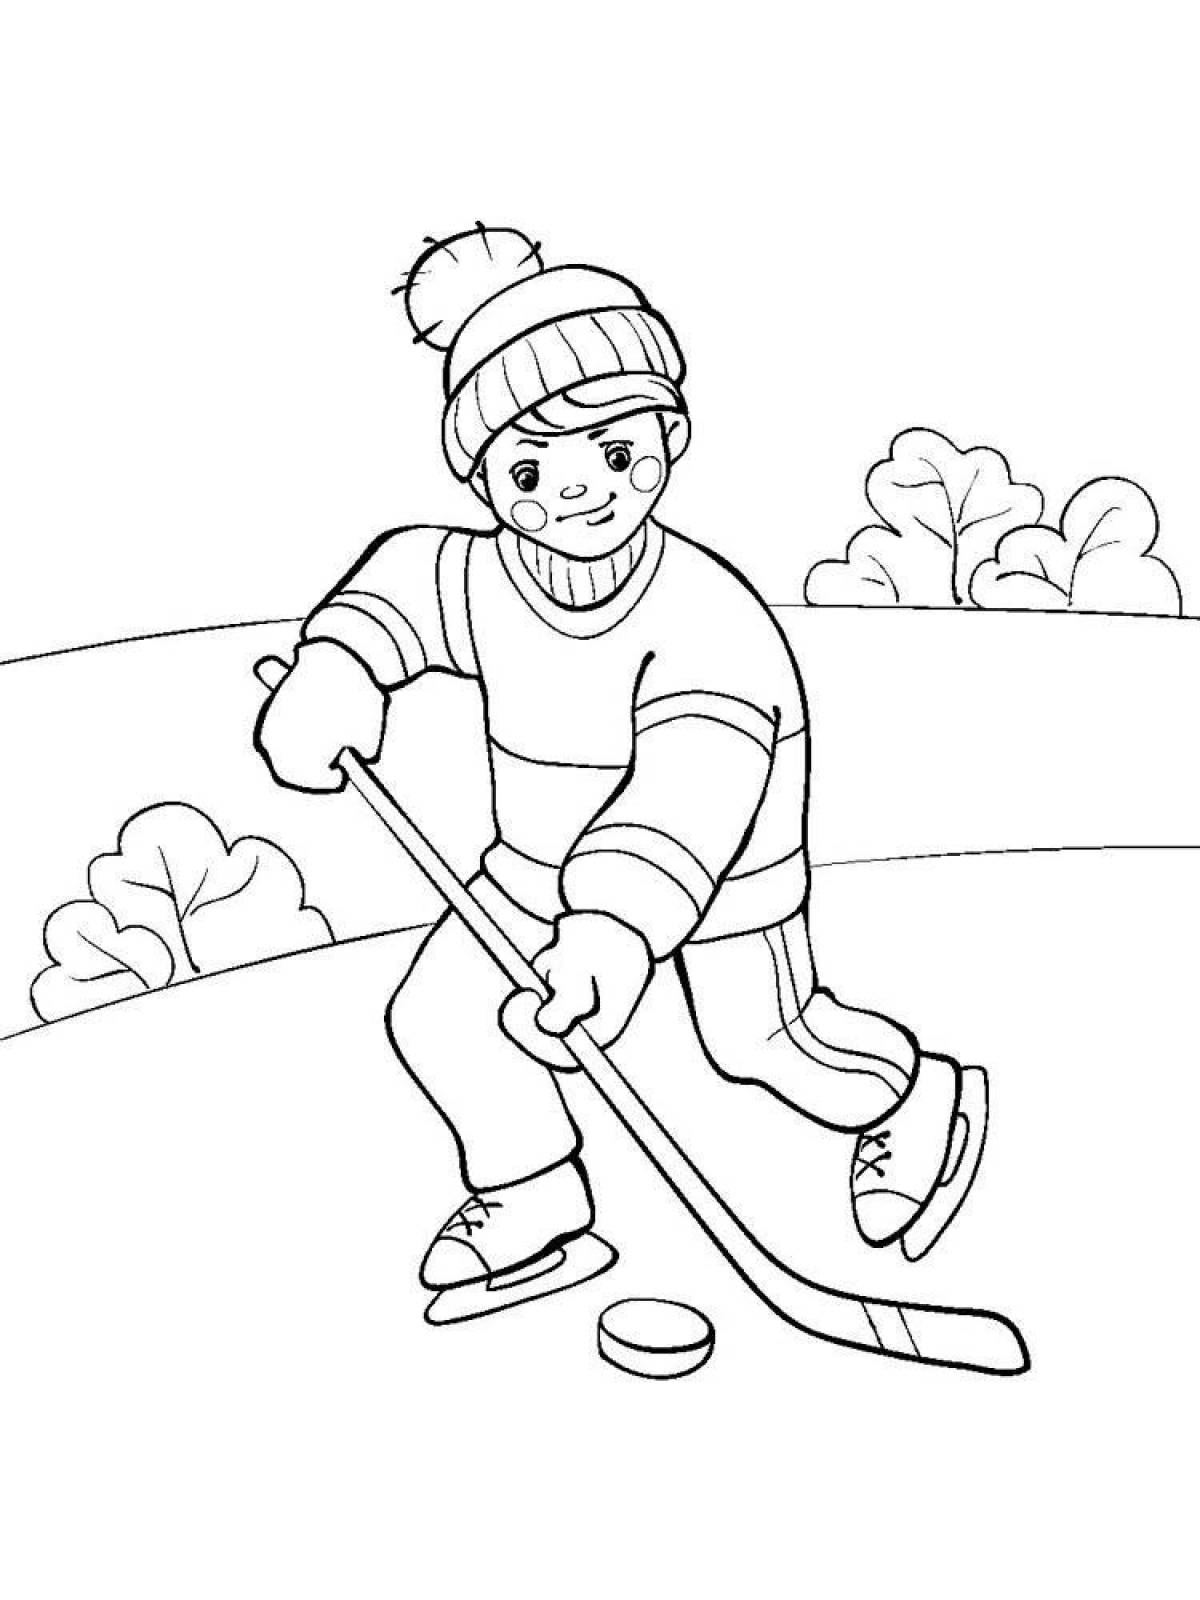 Winter sports for children 5 6 years old #4